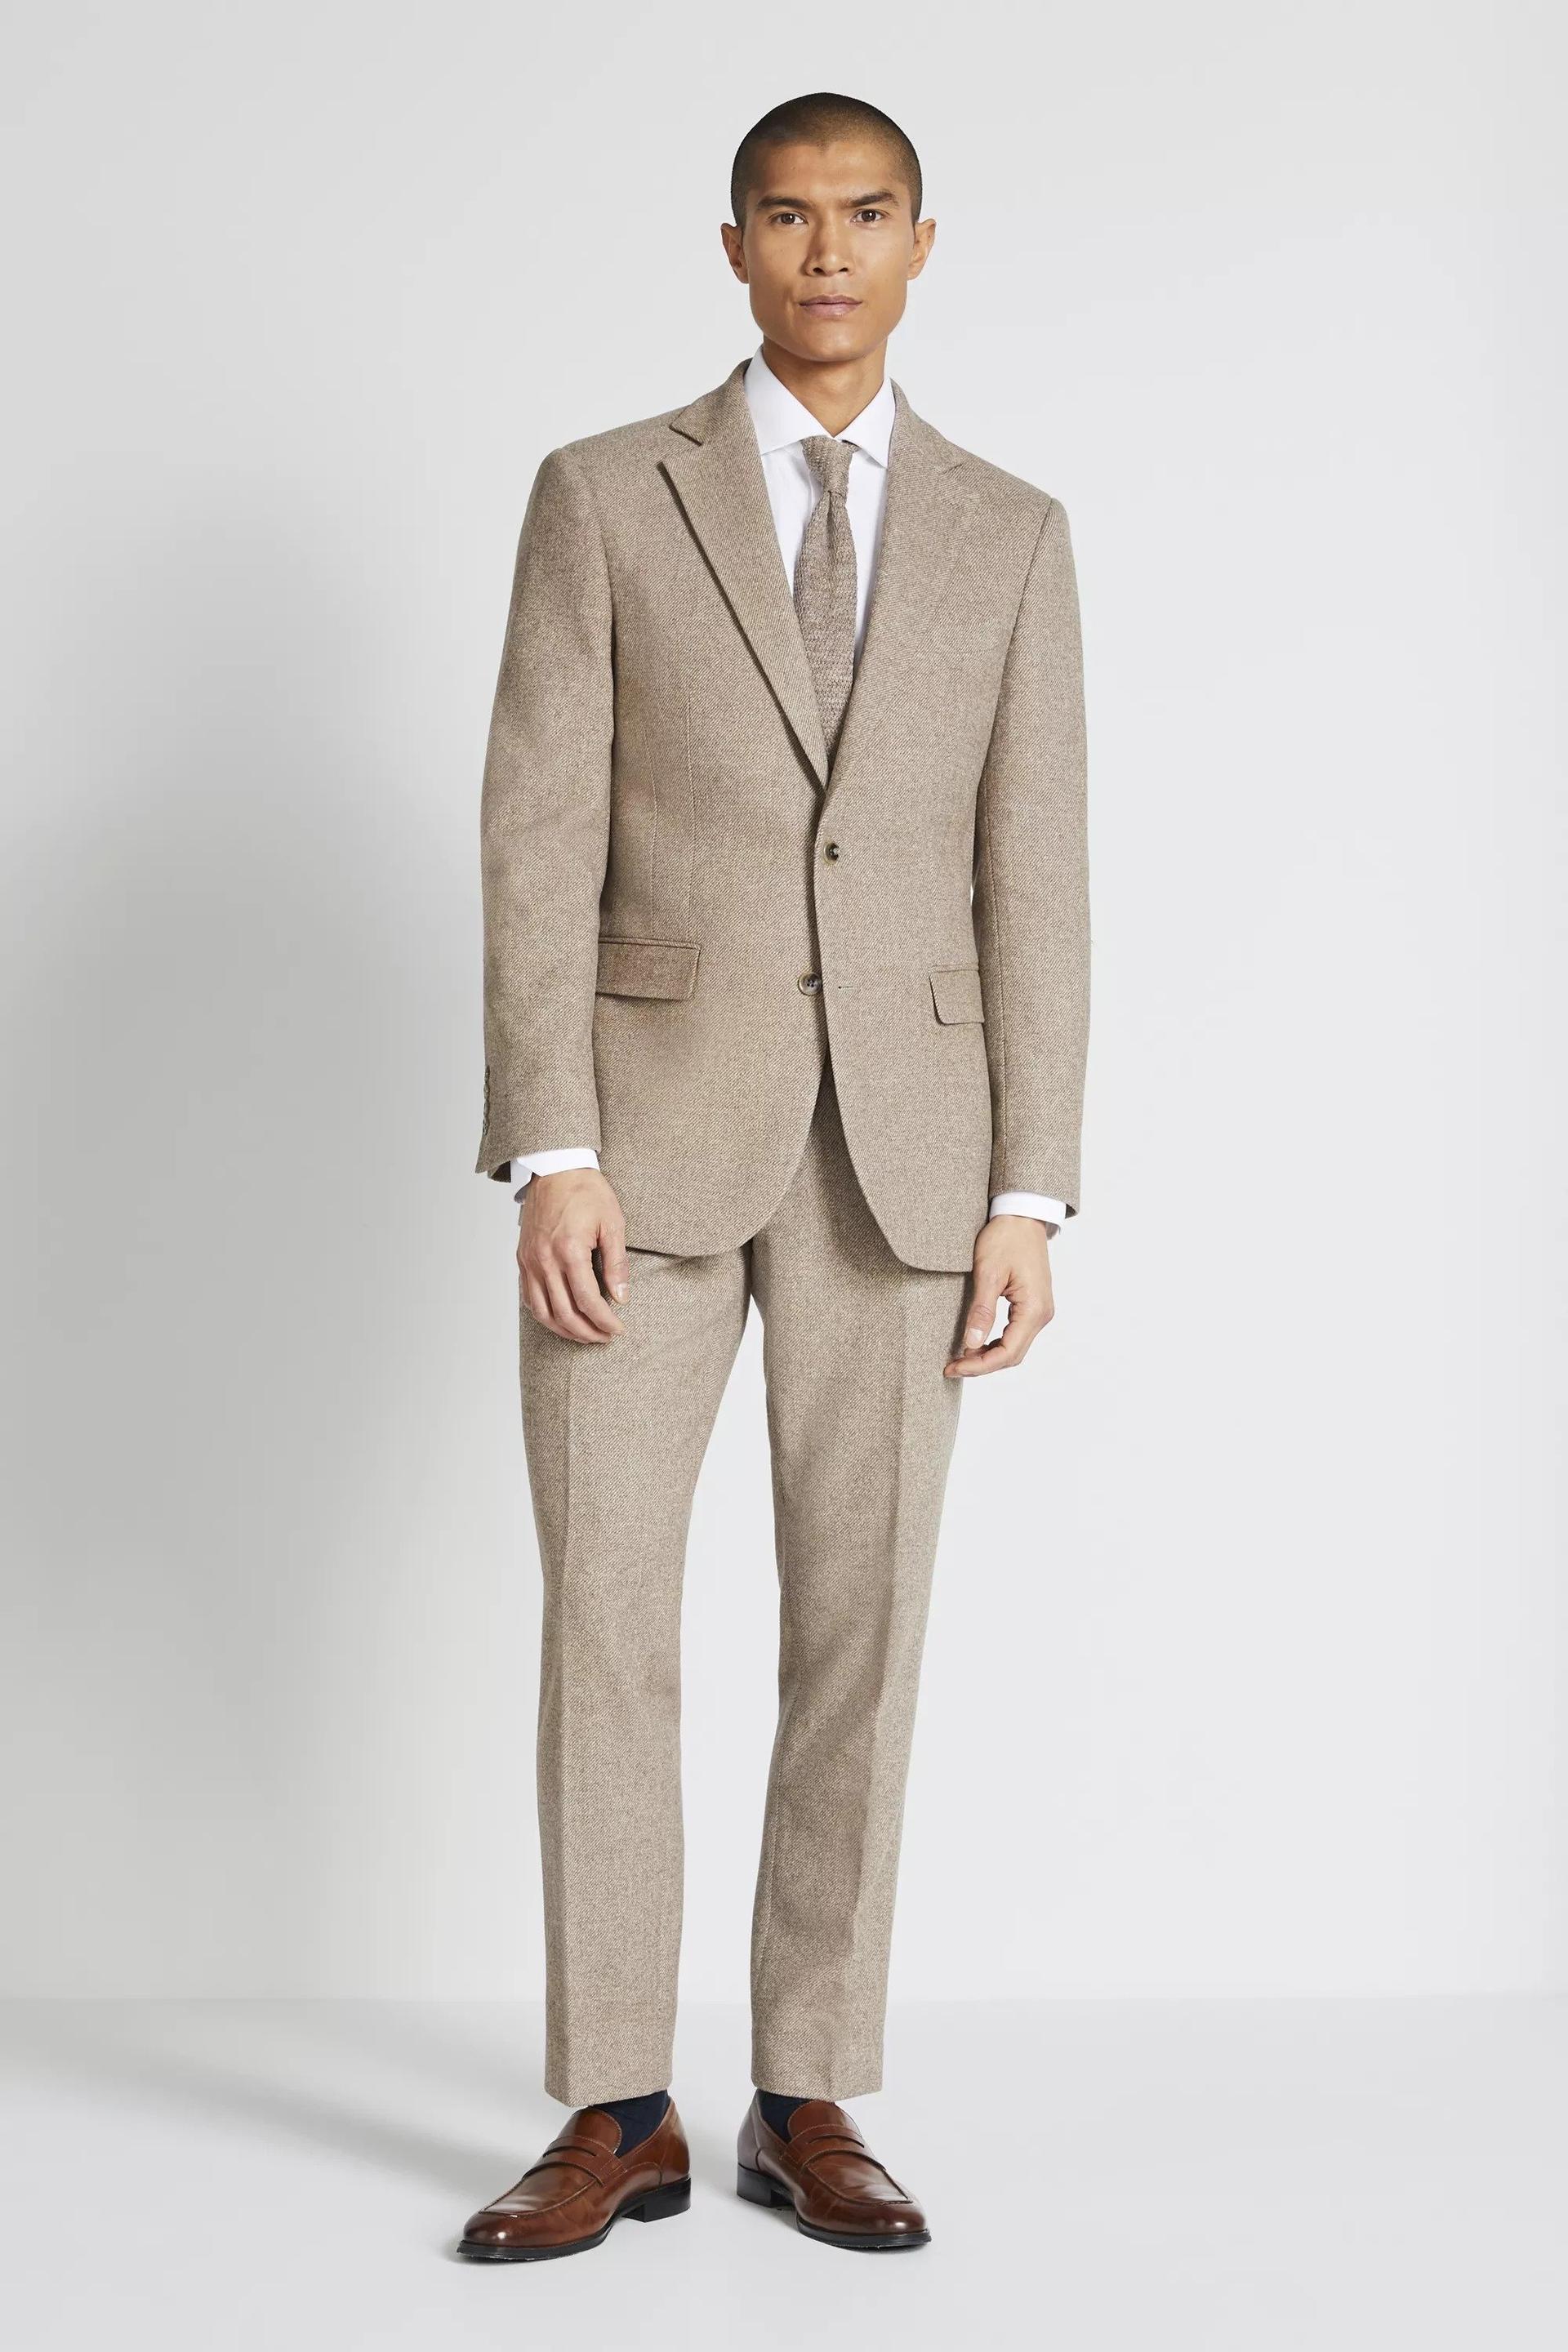 21 Rustic Wedding Suits for Relaxed Celebrations - hitched.co.uk ...